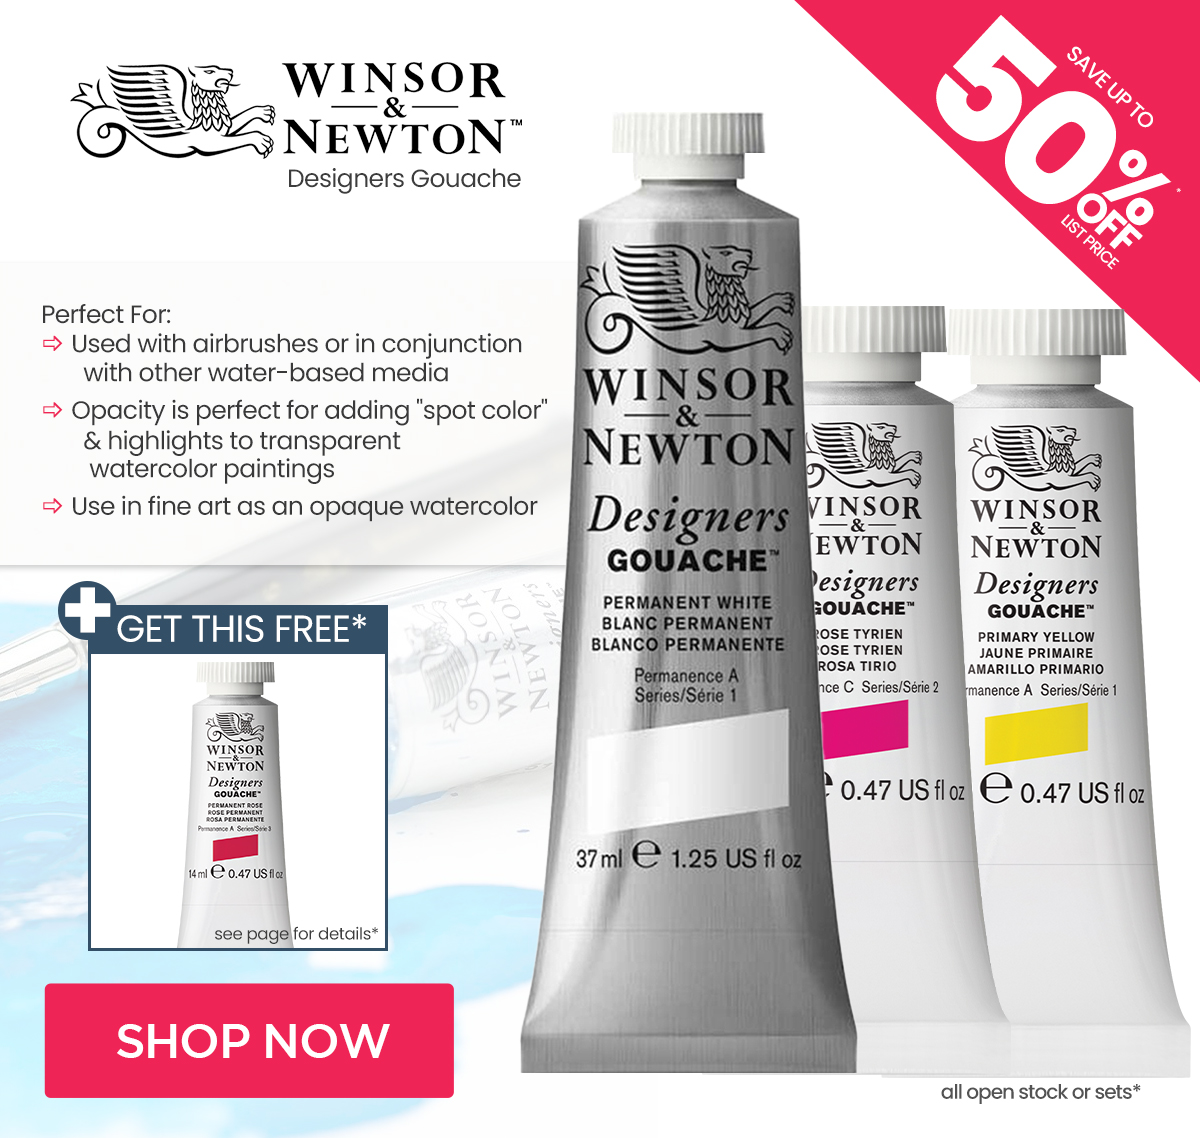 Winsor & Newton Designers Gouache with Free Gift